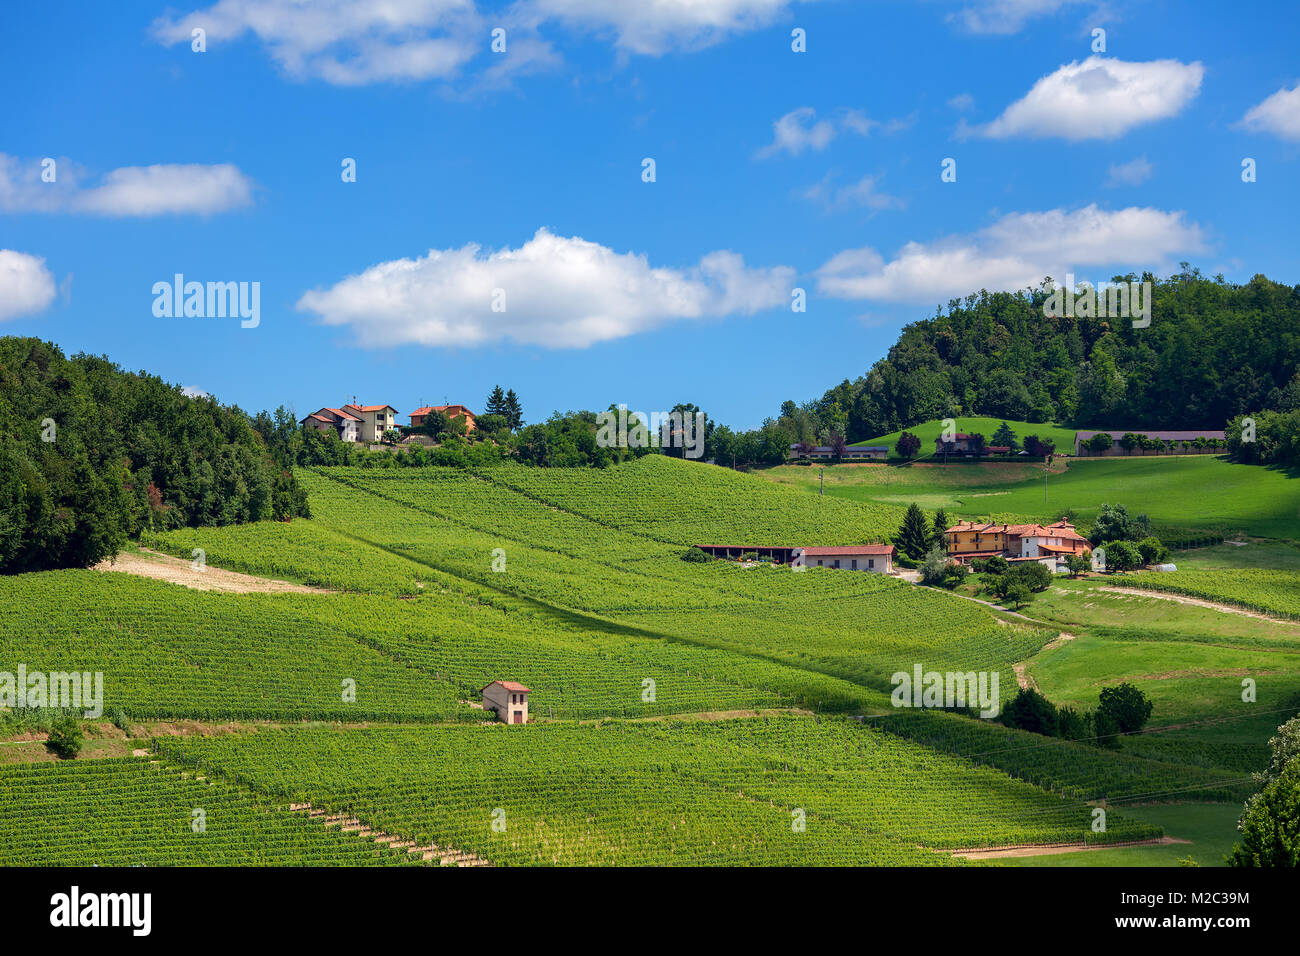 Green vineyards on the hill under blue sky with white clouds in Piedmont, Northern Italy. Stock Photo